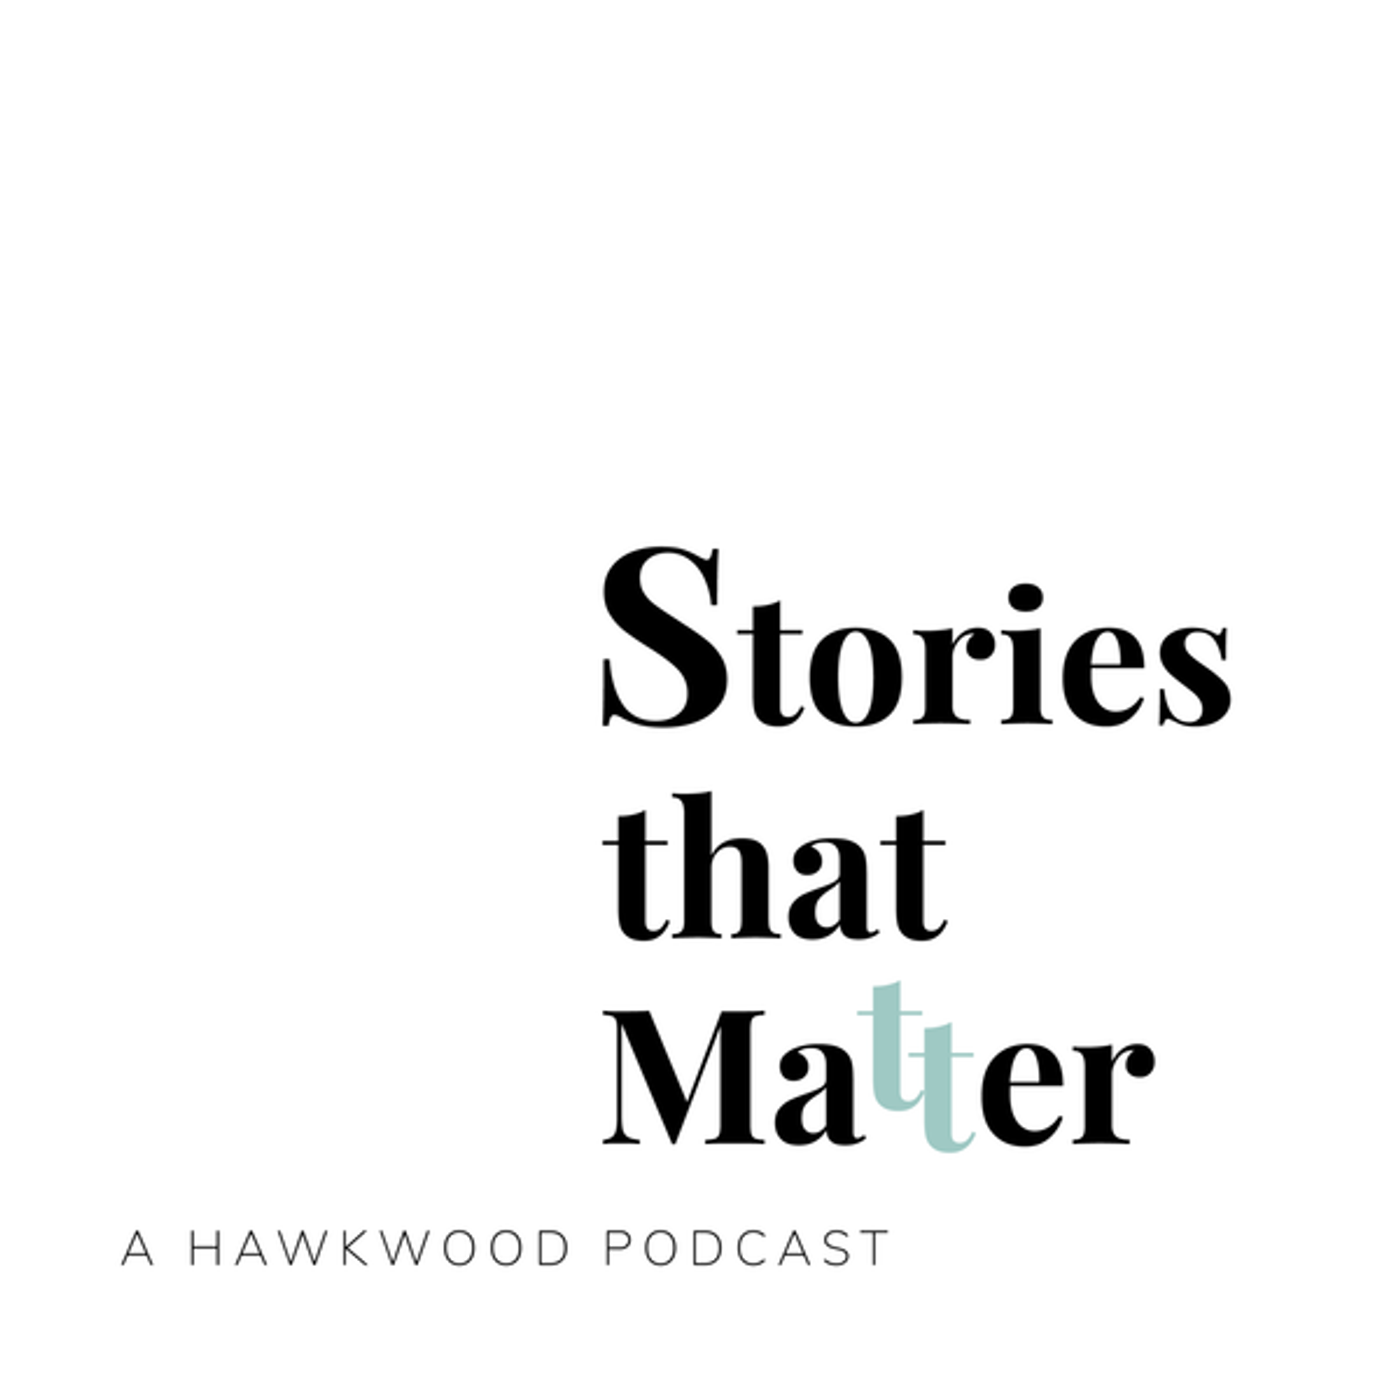 S2 Ep10: Stories that Matter with Missy Mazzoli & Royce Vavreck